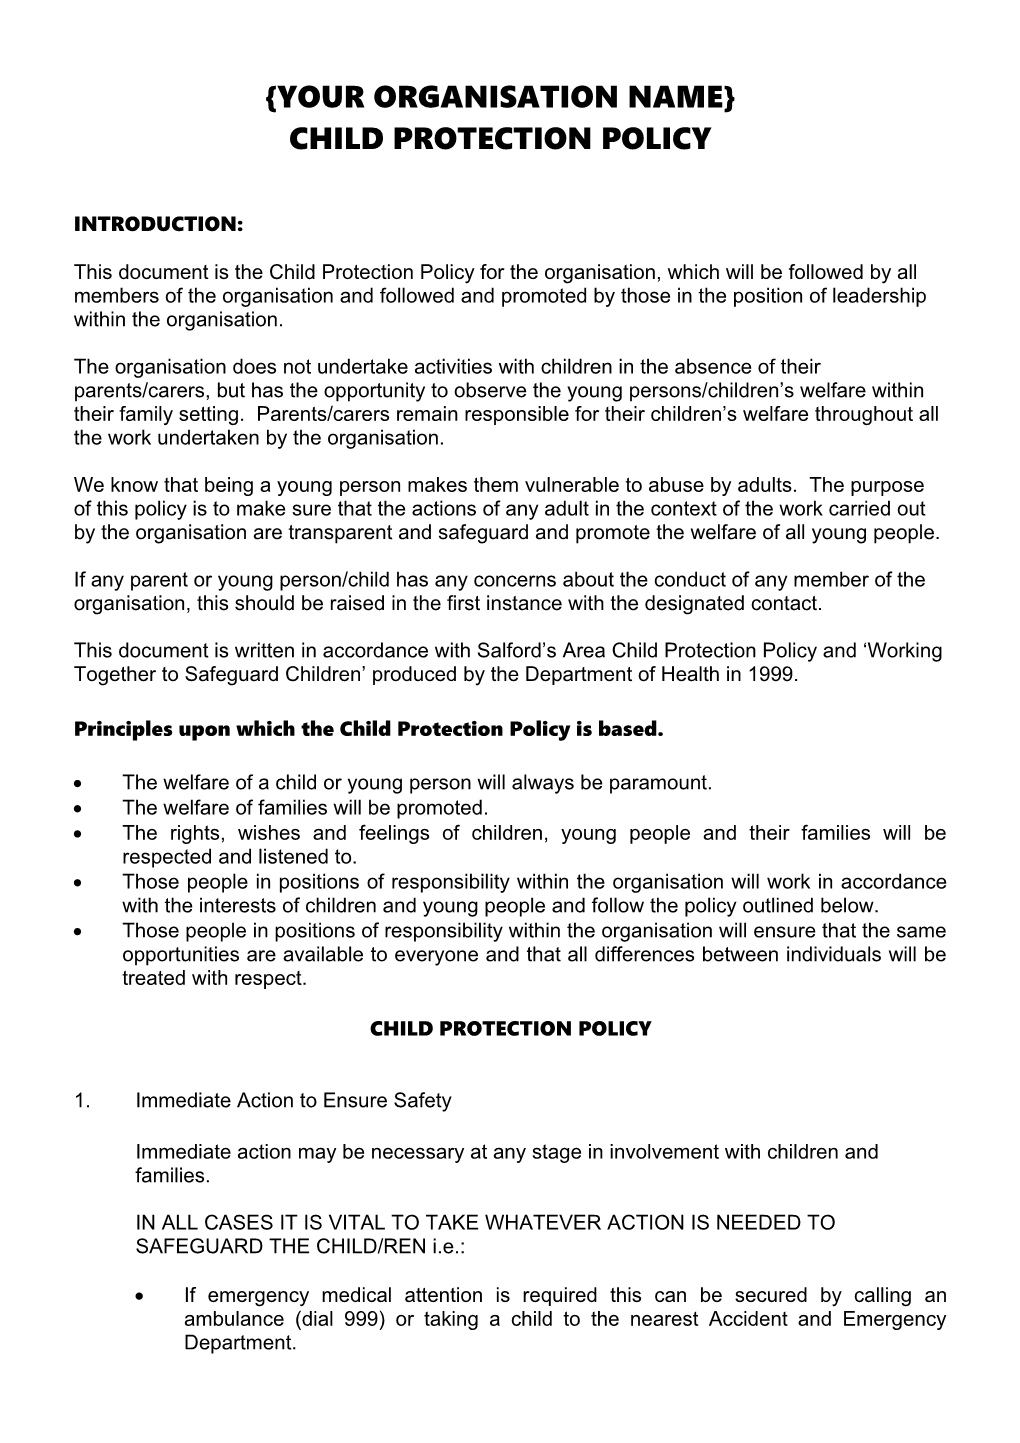 Example of Child Protection Policy for Voluntary Organizations Appendix 3